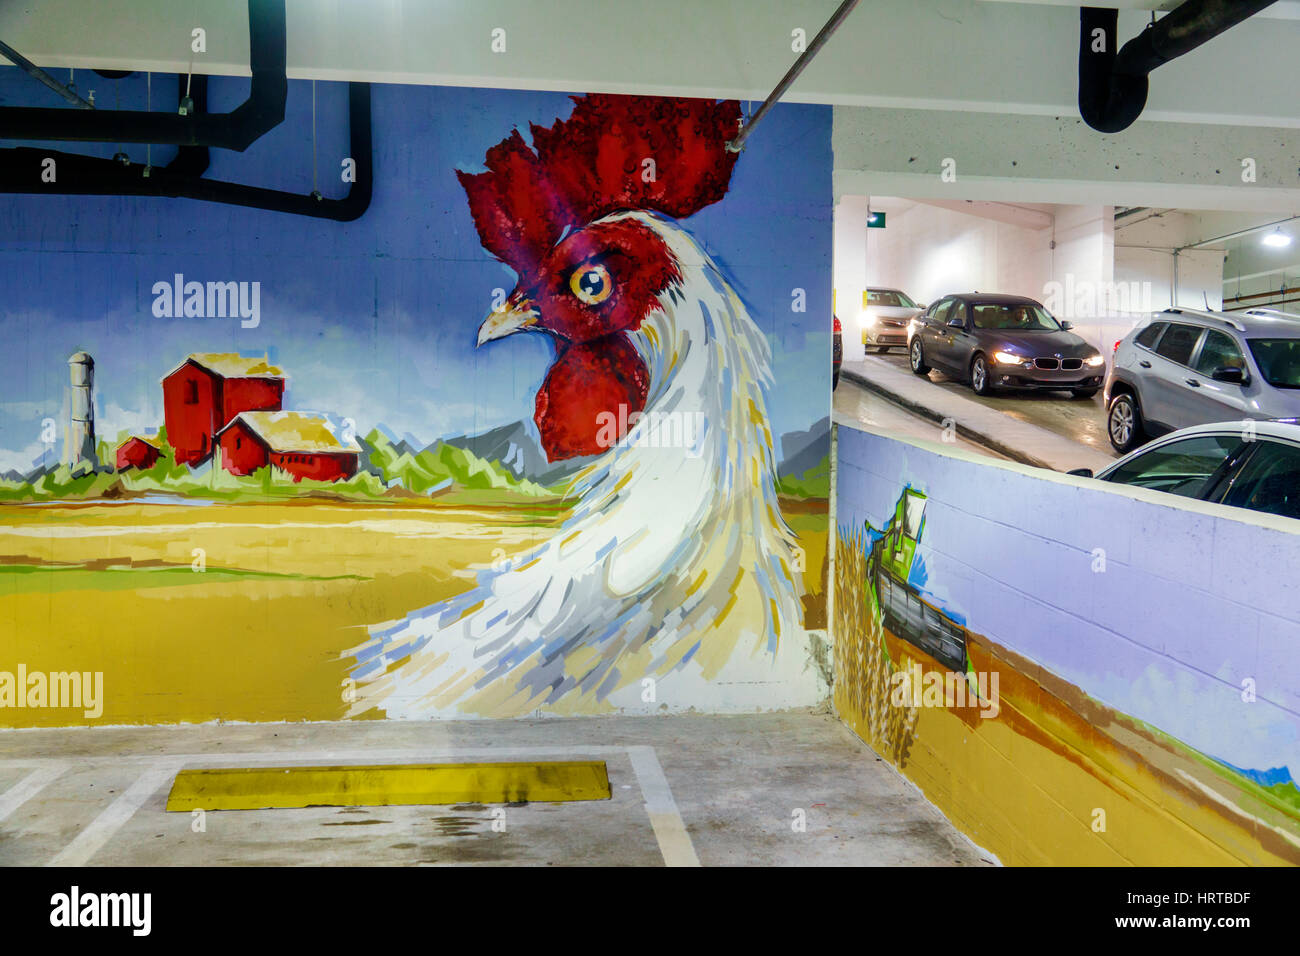 Florida South,Miami,Downtown,Whole Foods Market,organic grocer,parking garage,ramp,cars entering,mural,rooster,visitors travel traveling tour tourist Stock Photo